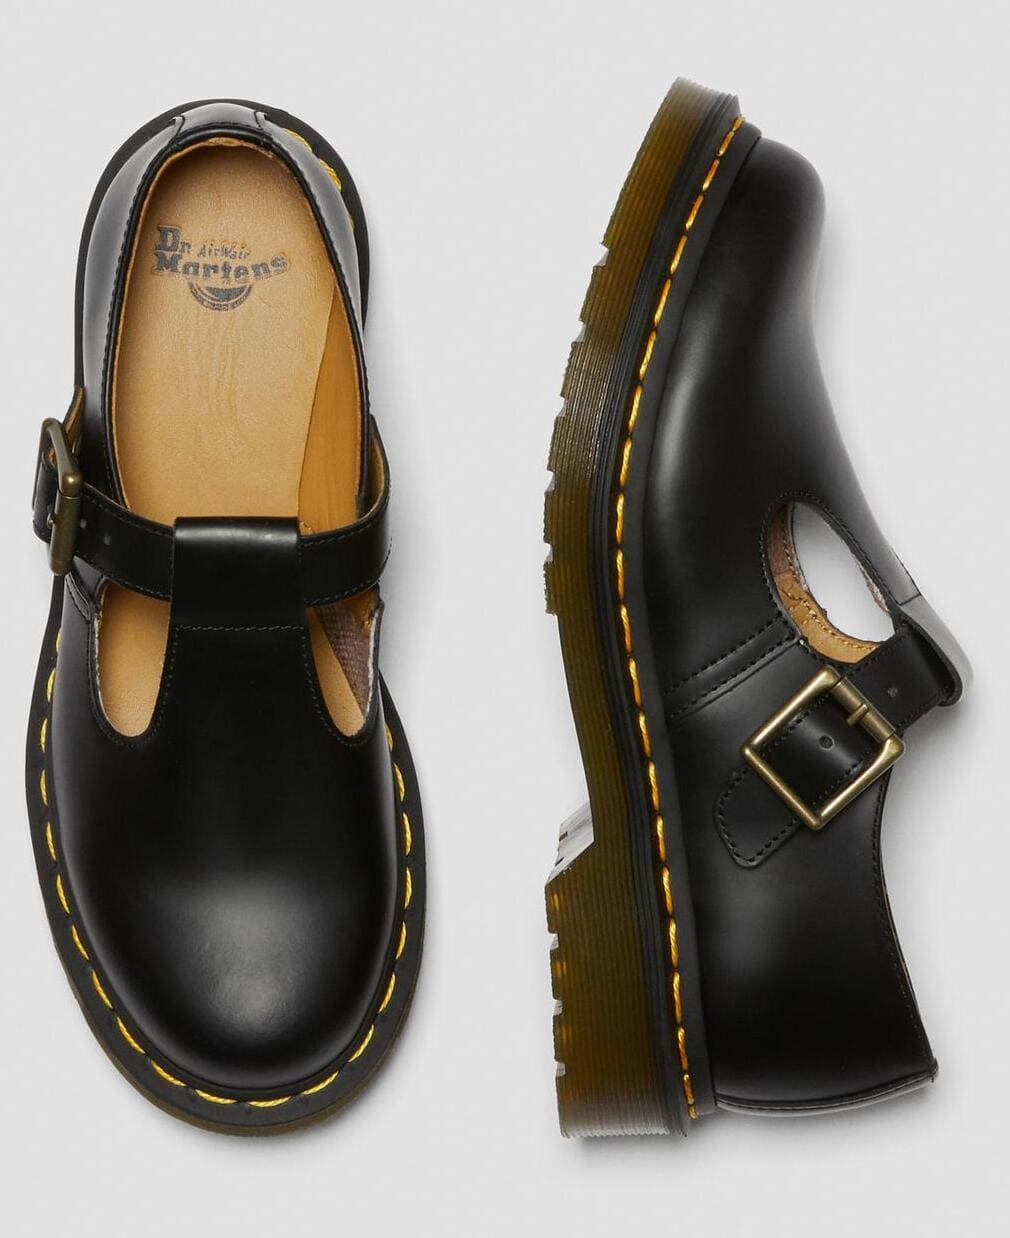 Dr. Martens Polley Smooth Leather Mary Janes Black